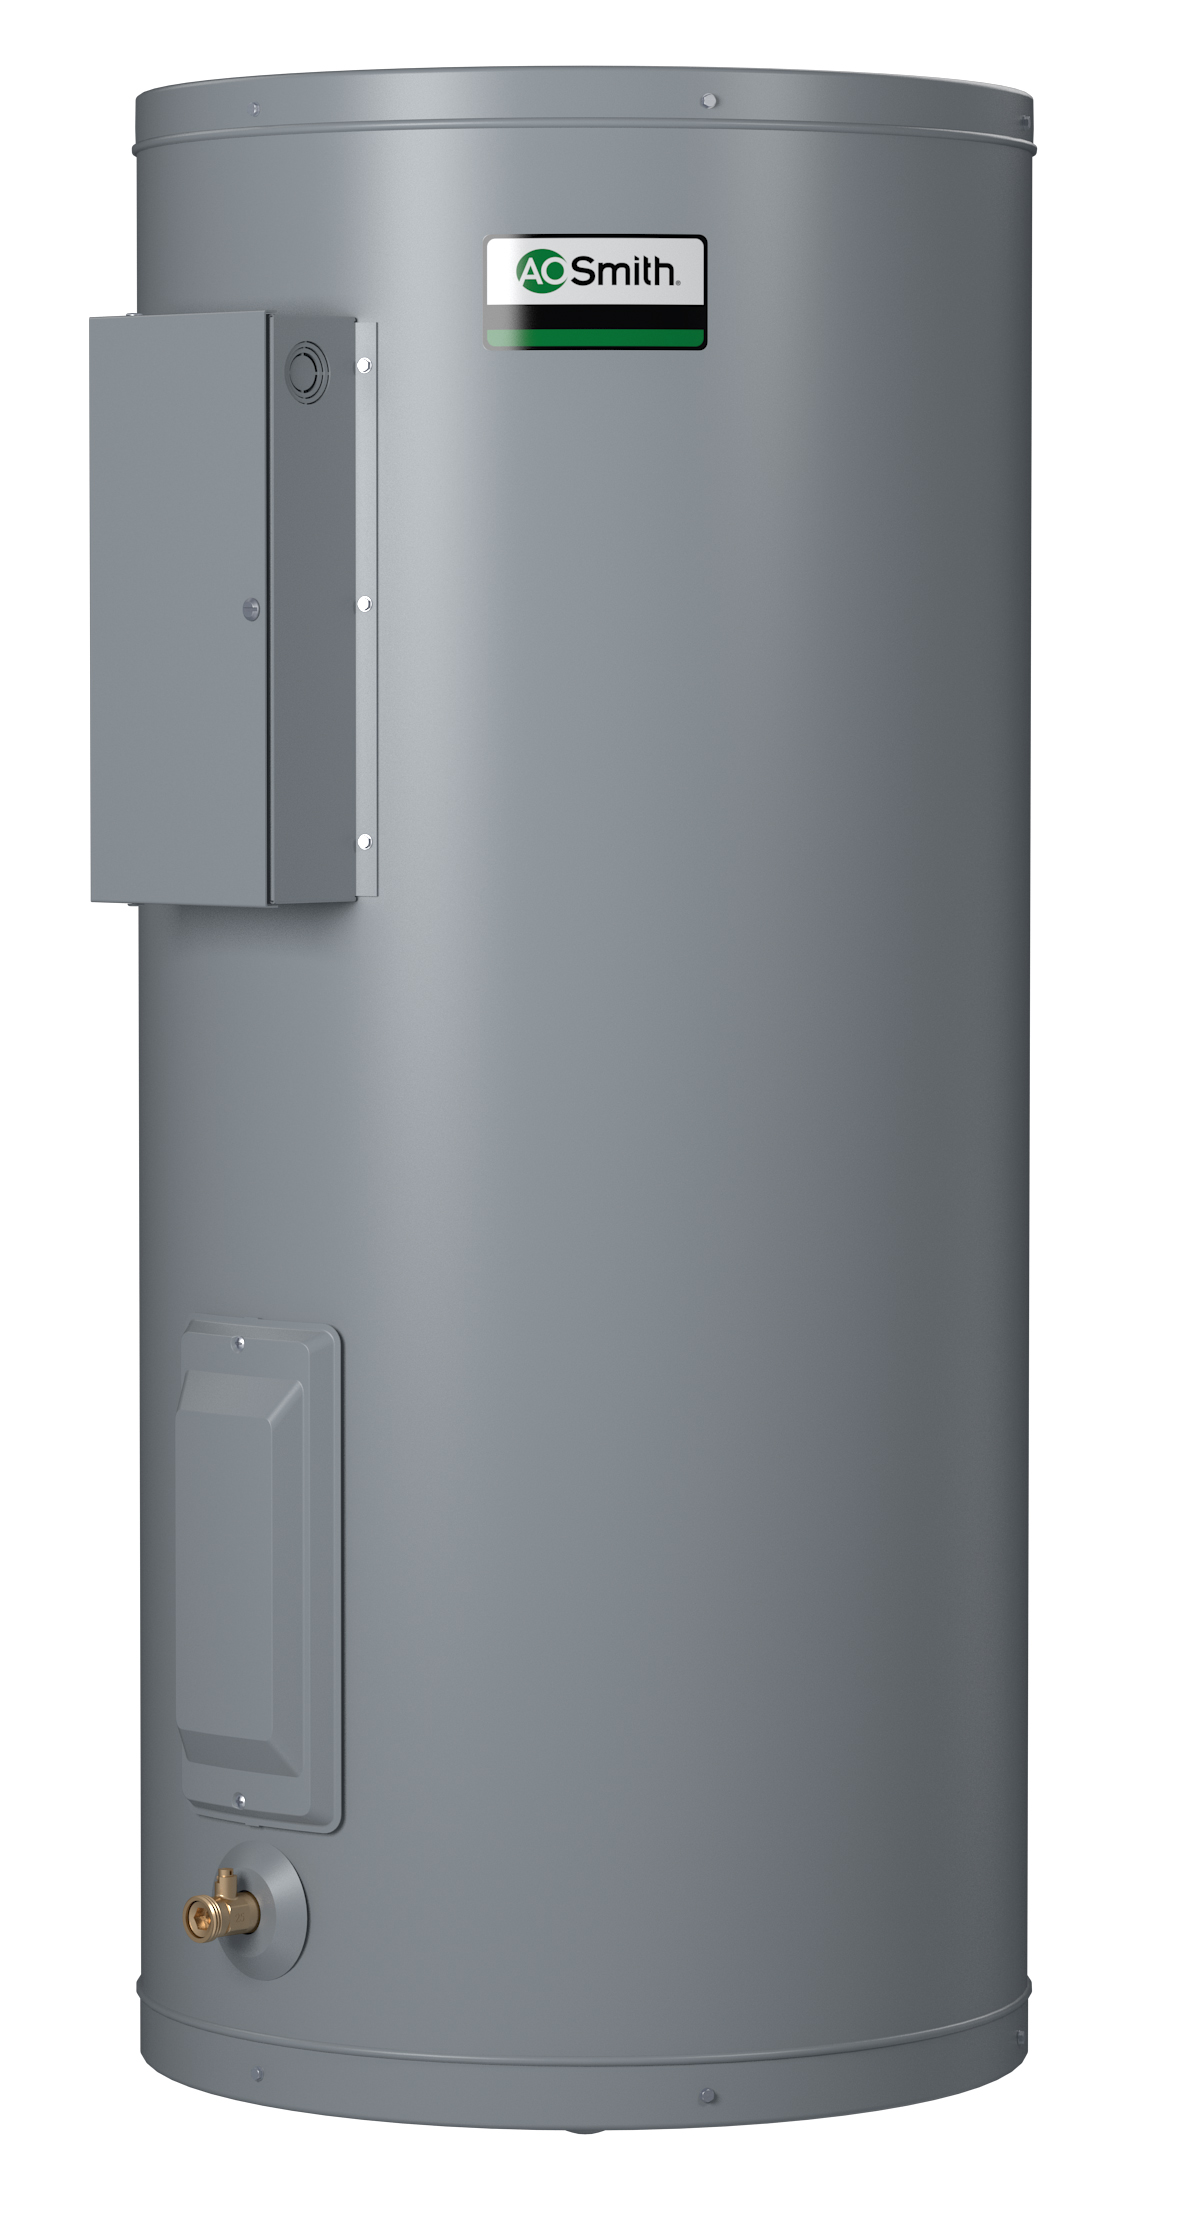 AO SMITH DEN-120D: 120 GALLONS, 9.0KW, 480 VOLT, 1 PHASE, (2-4500 WATT ELEMENTS, SIMULTANEOUS WIRING), DURA-POWER, LIGHT DUTY COMMERCIAL ELECTRIC WATER HEATER